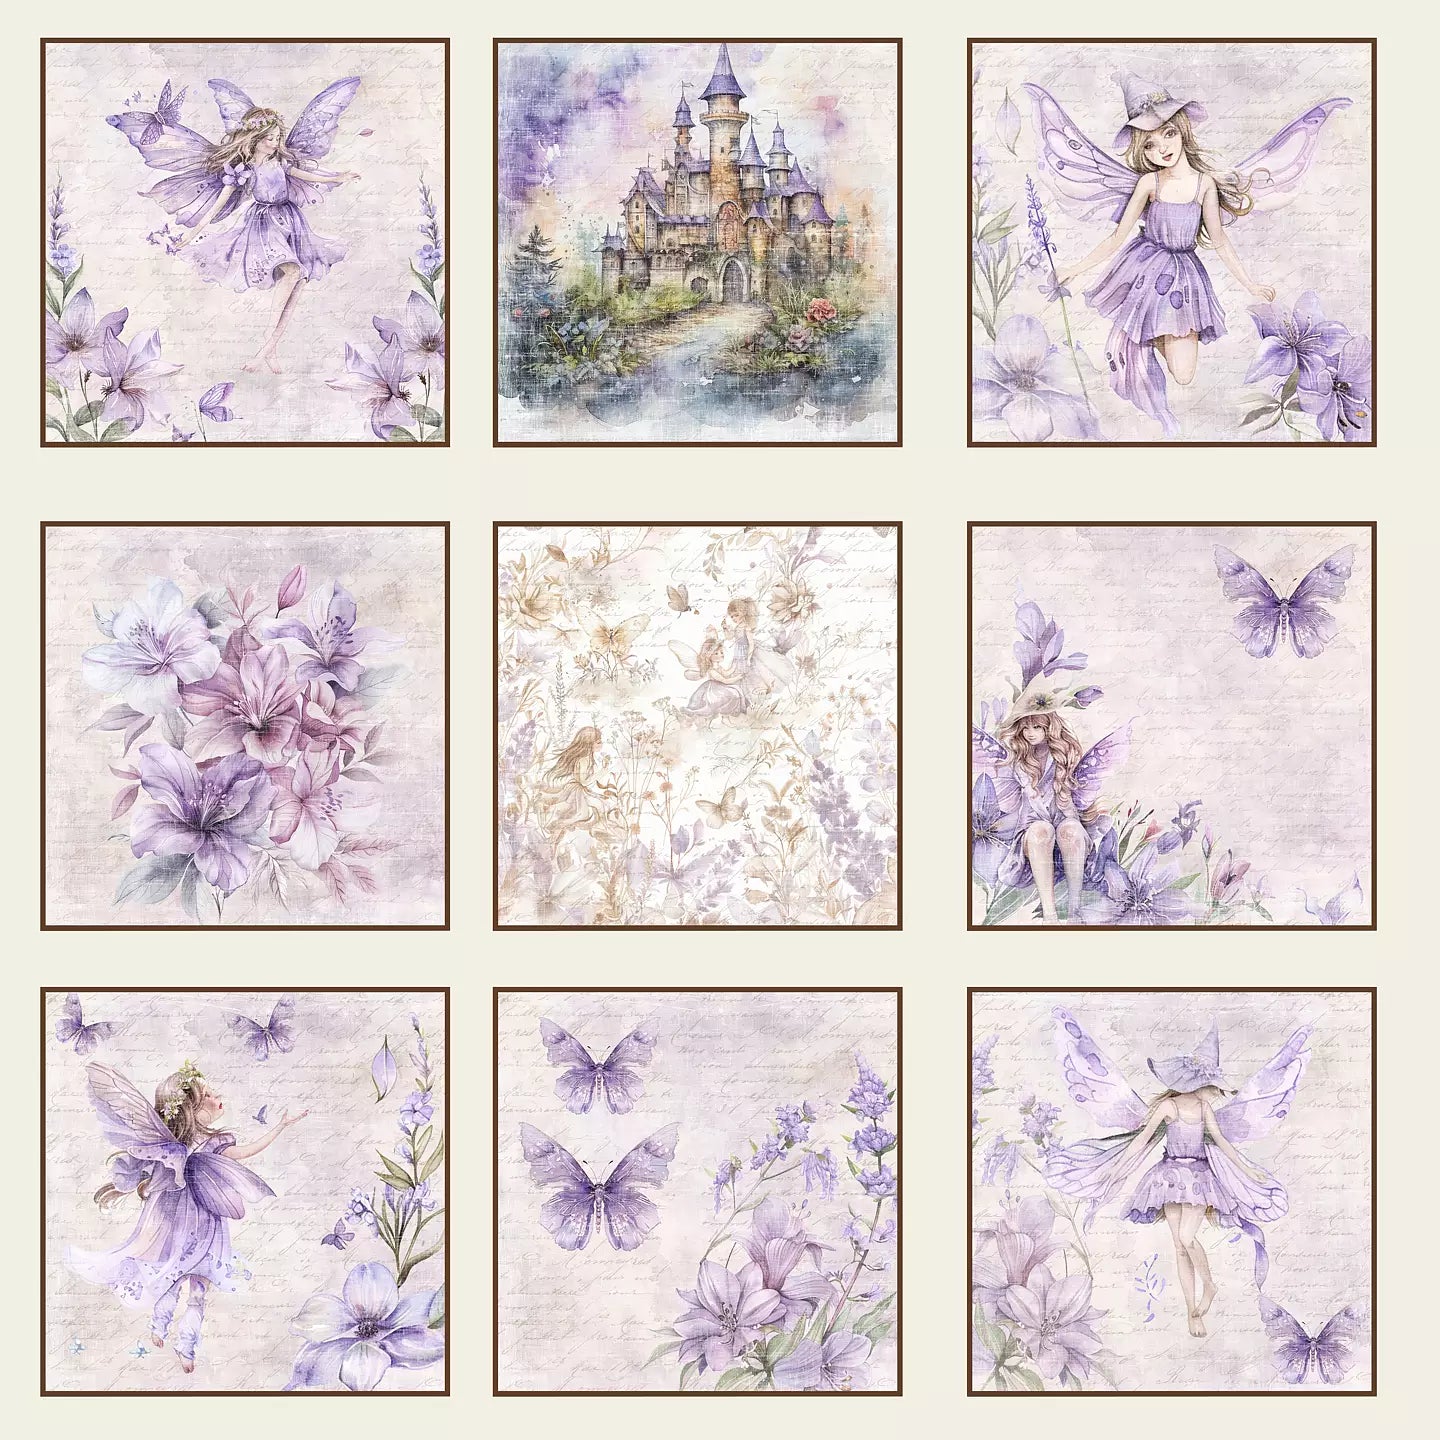 NYHET! Reprint Paperpack - Fairies Collection Paperpack - 8 X 8